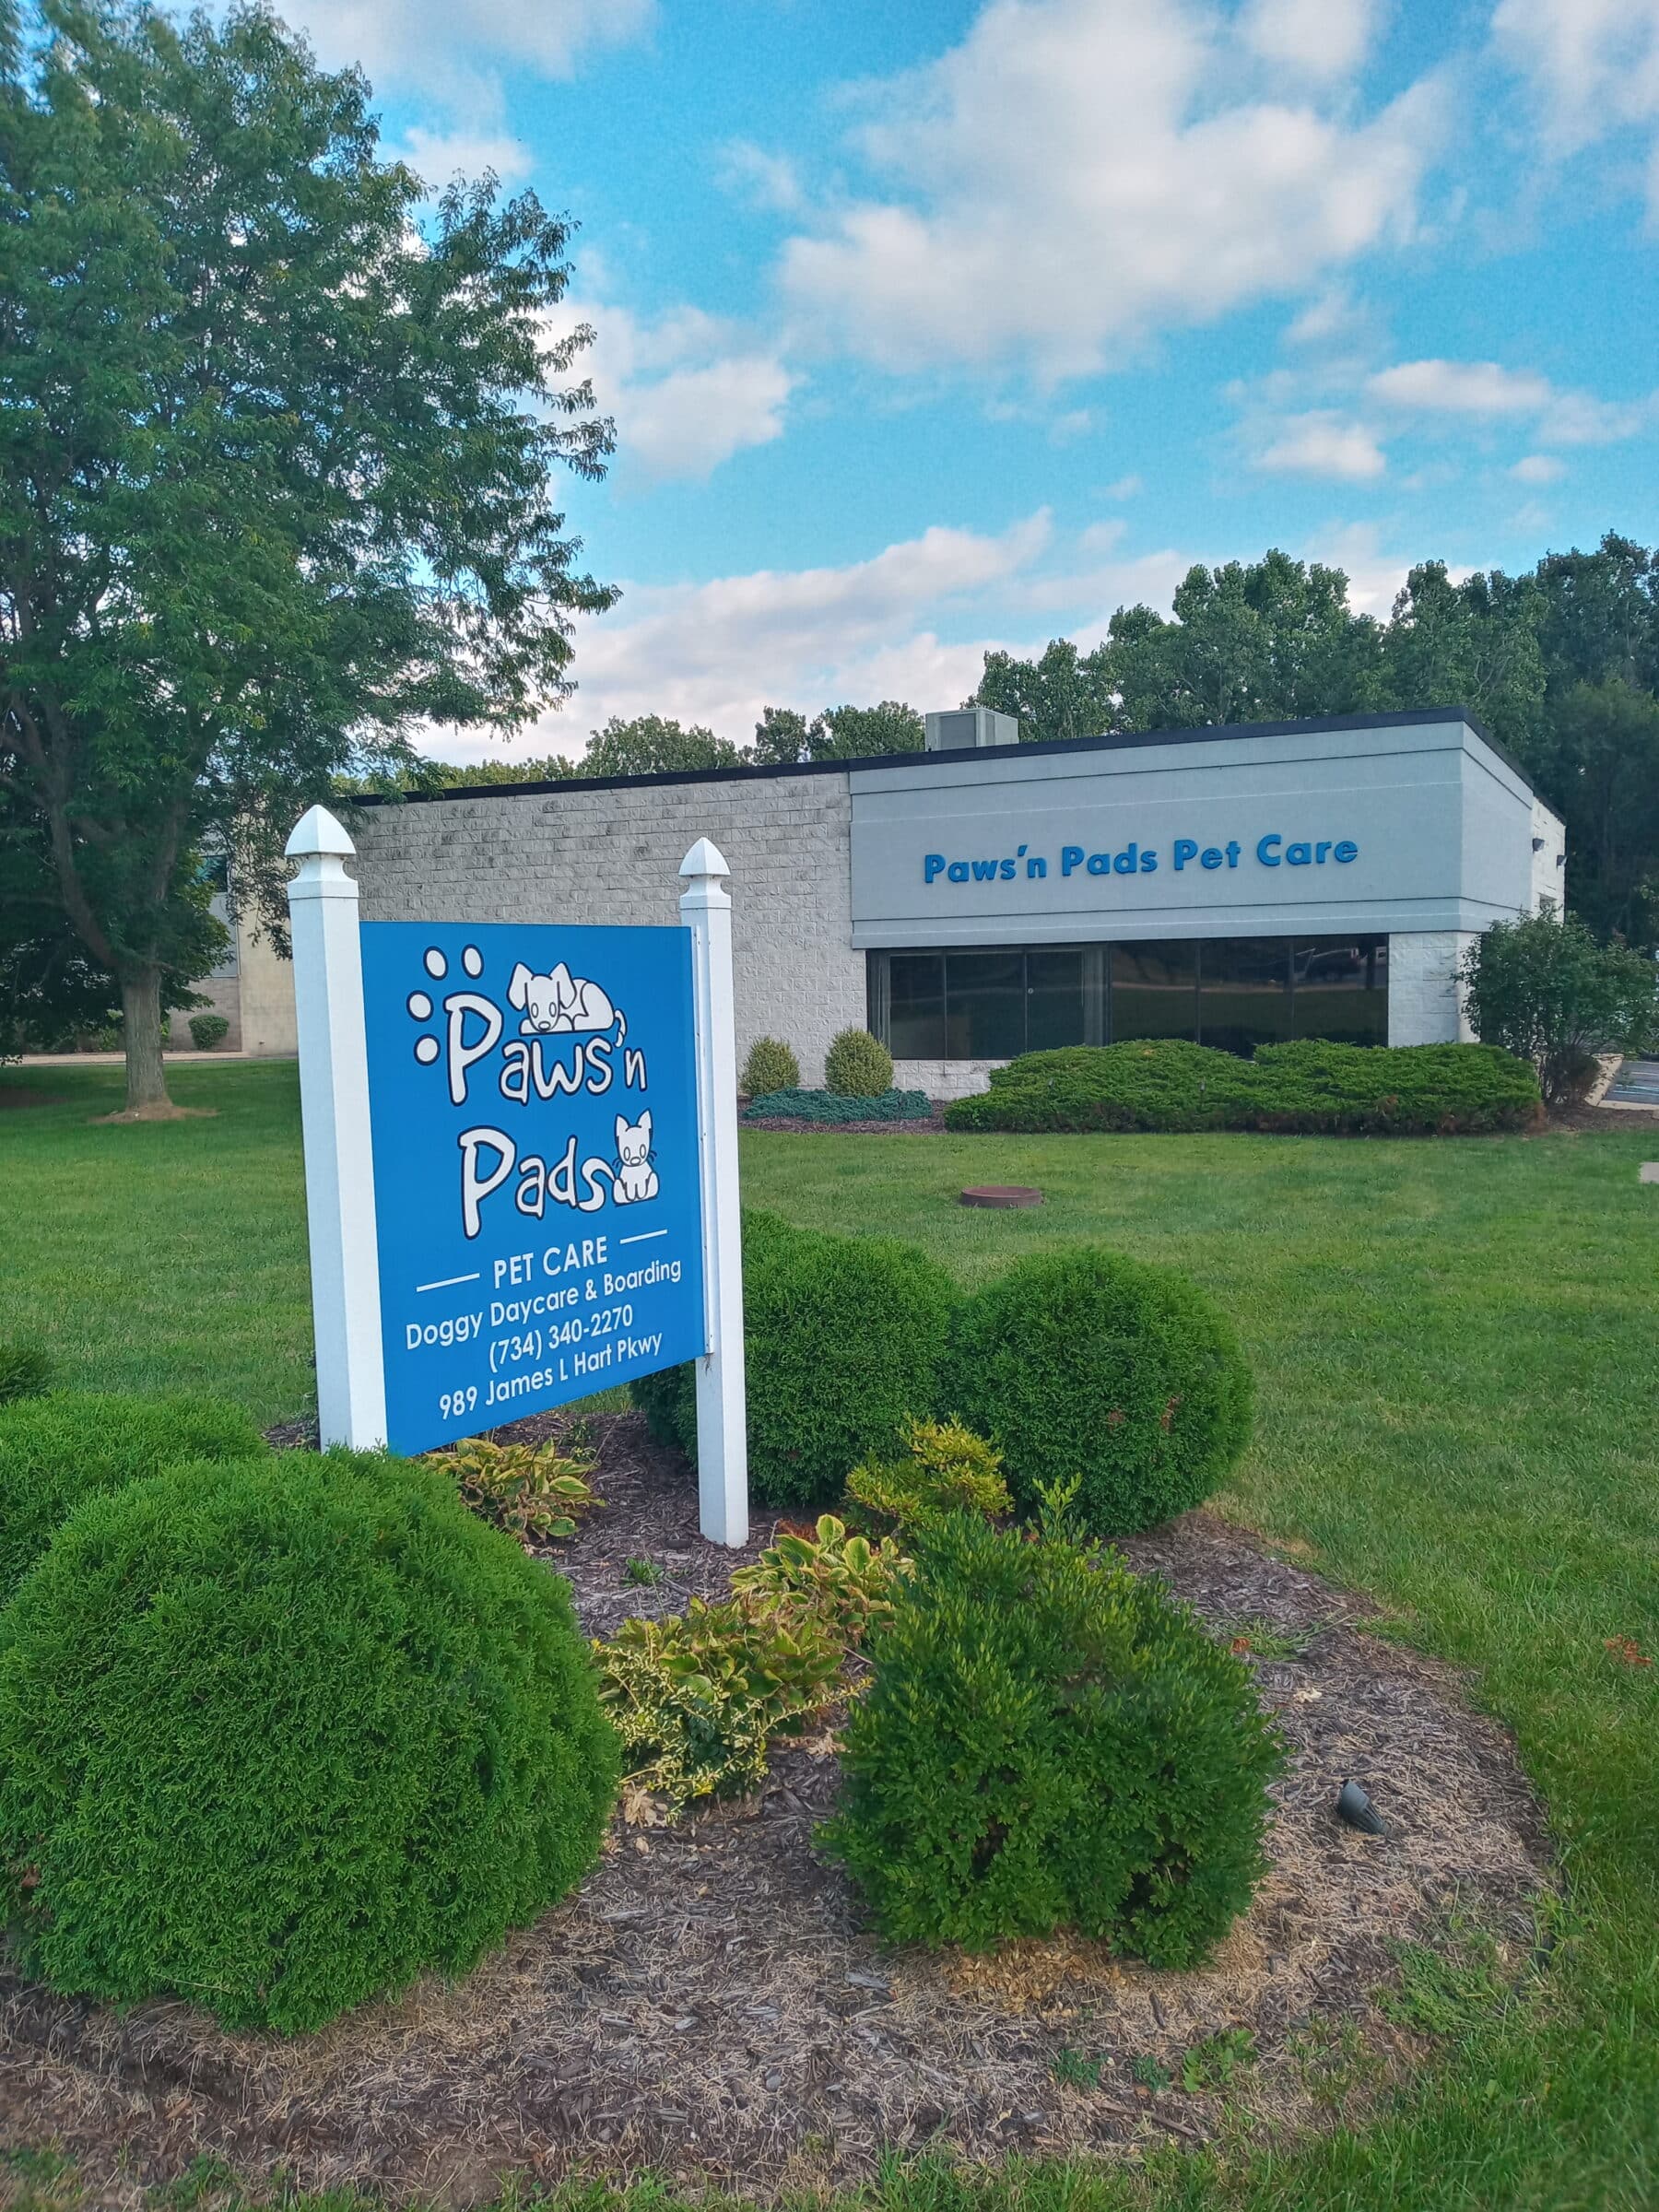 Paws 'n Pads Pet Care, LLC is a family owned Doggy Daycare and Boarding facility